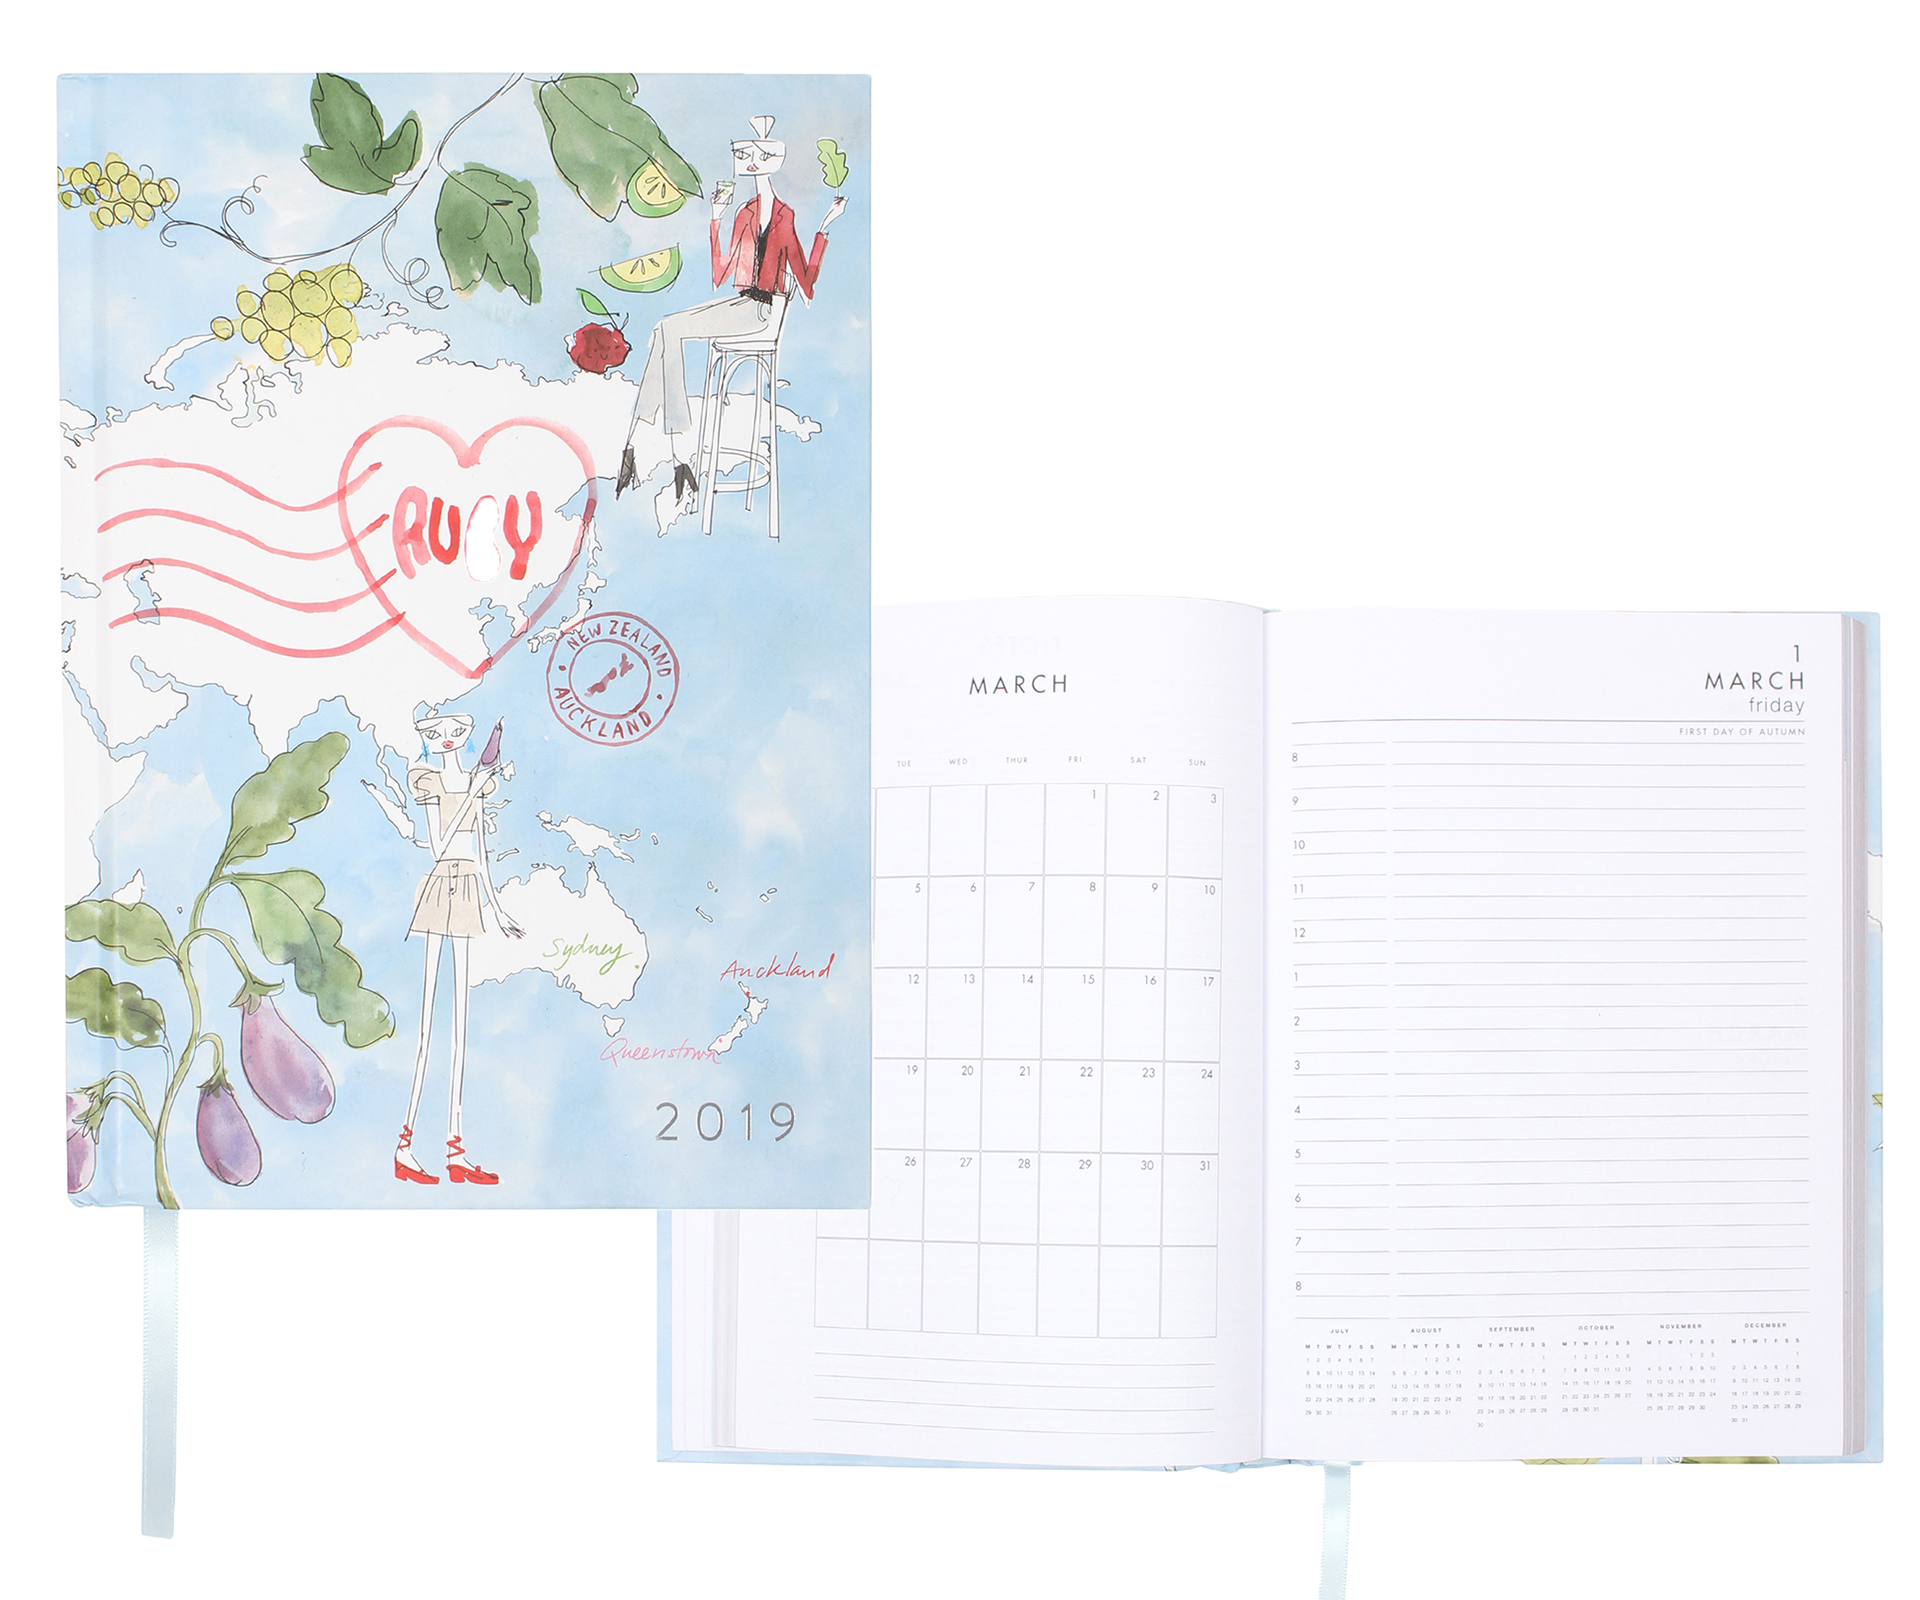 Ruby 2019 diary Get the taste for travel whilst sitting at your desk with Ruby’s 2019 diary. Featuring silver edged pages, culinary-inspired illustrations and recipes from six destinations around the globe, this daily diary is more than just a date recorder. $20 from Ruby.